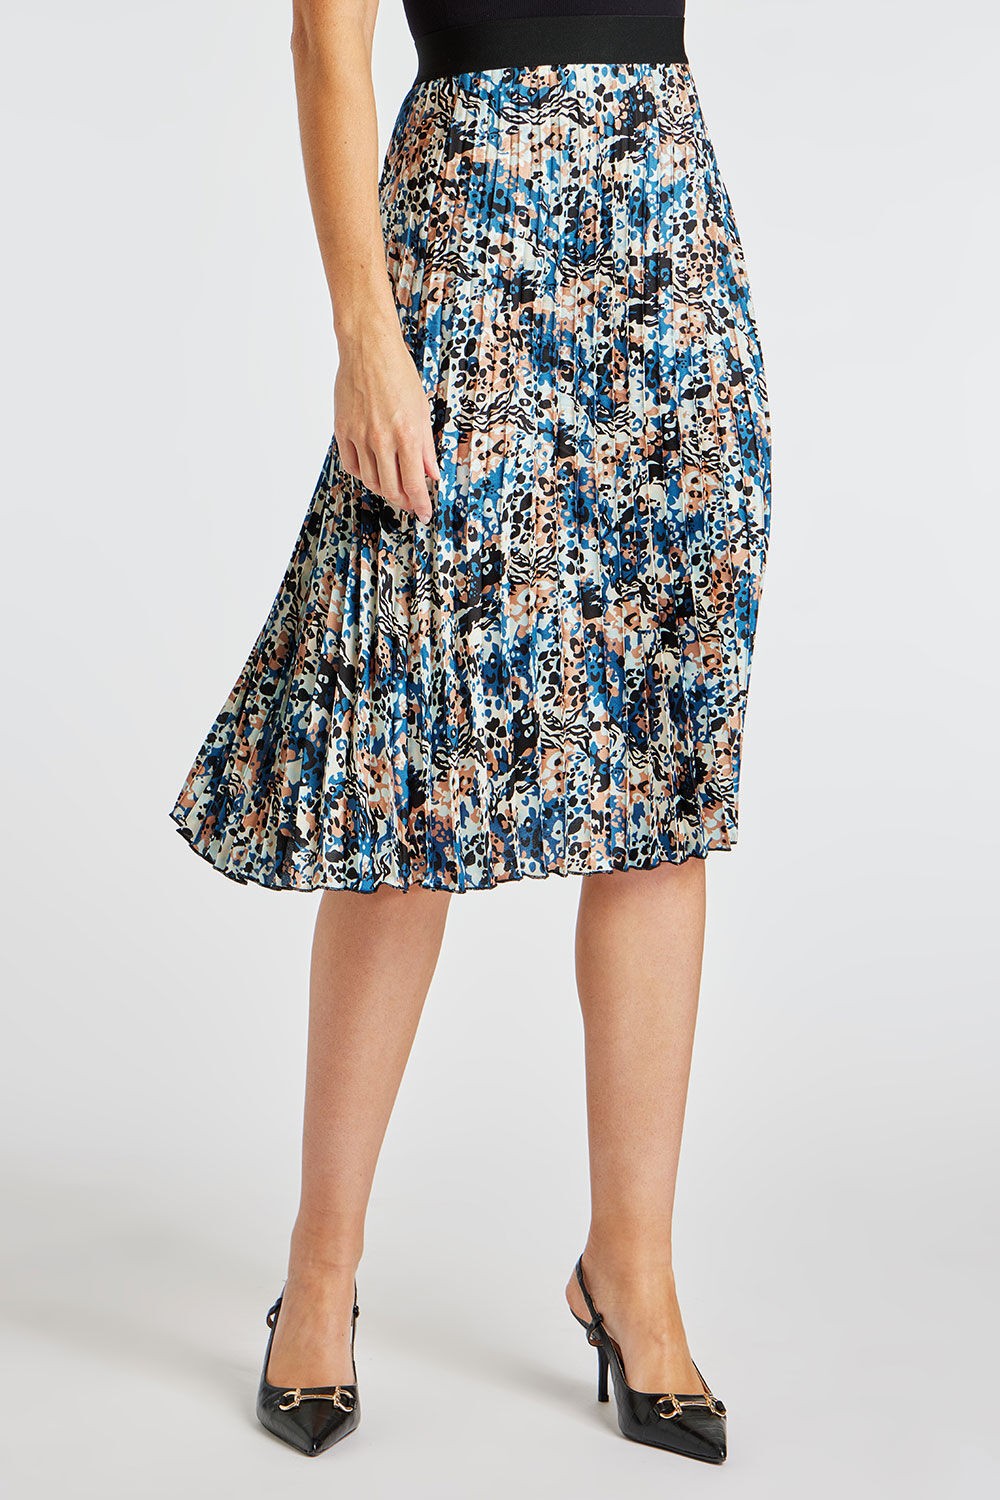 Bonmarche Brown Animal Patchwork Print Elasticated Pleated Skirt, Size: 16